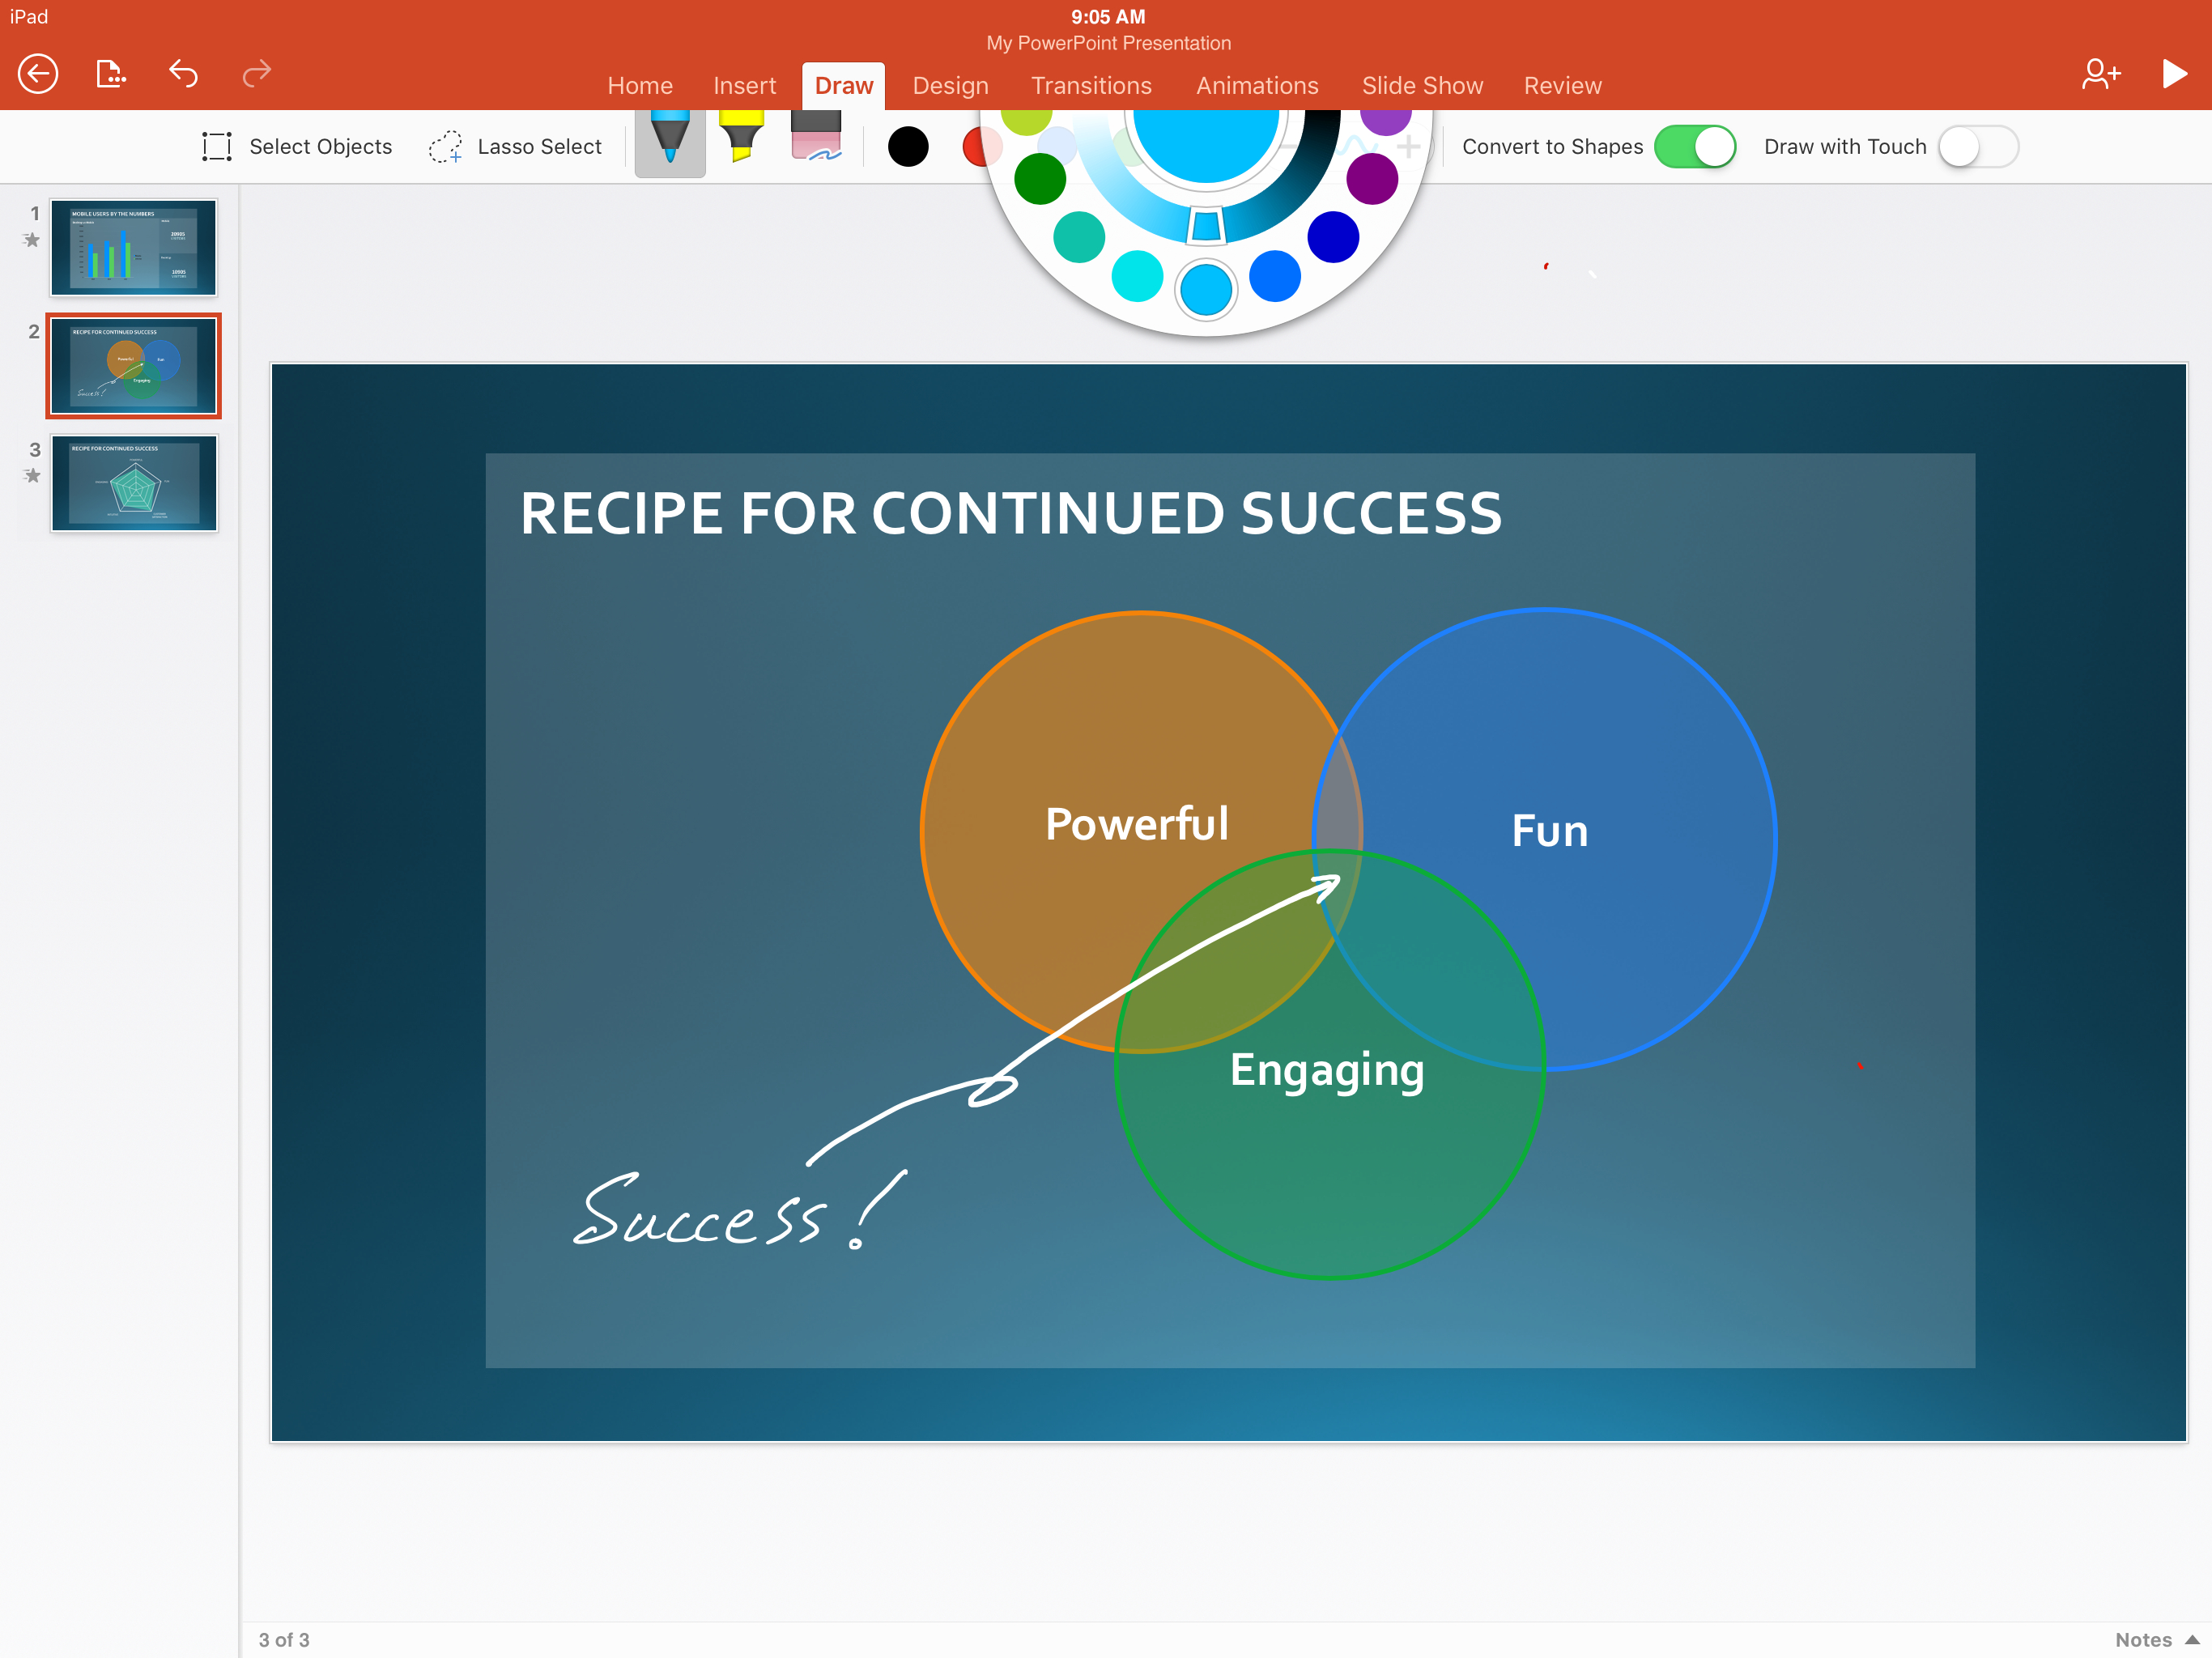 How To Make A Venn Diagram On Word New To Office 365 In Januarynew Inking Tools Collaboration